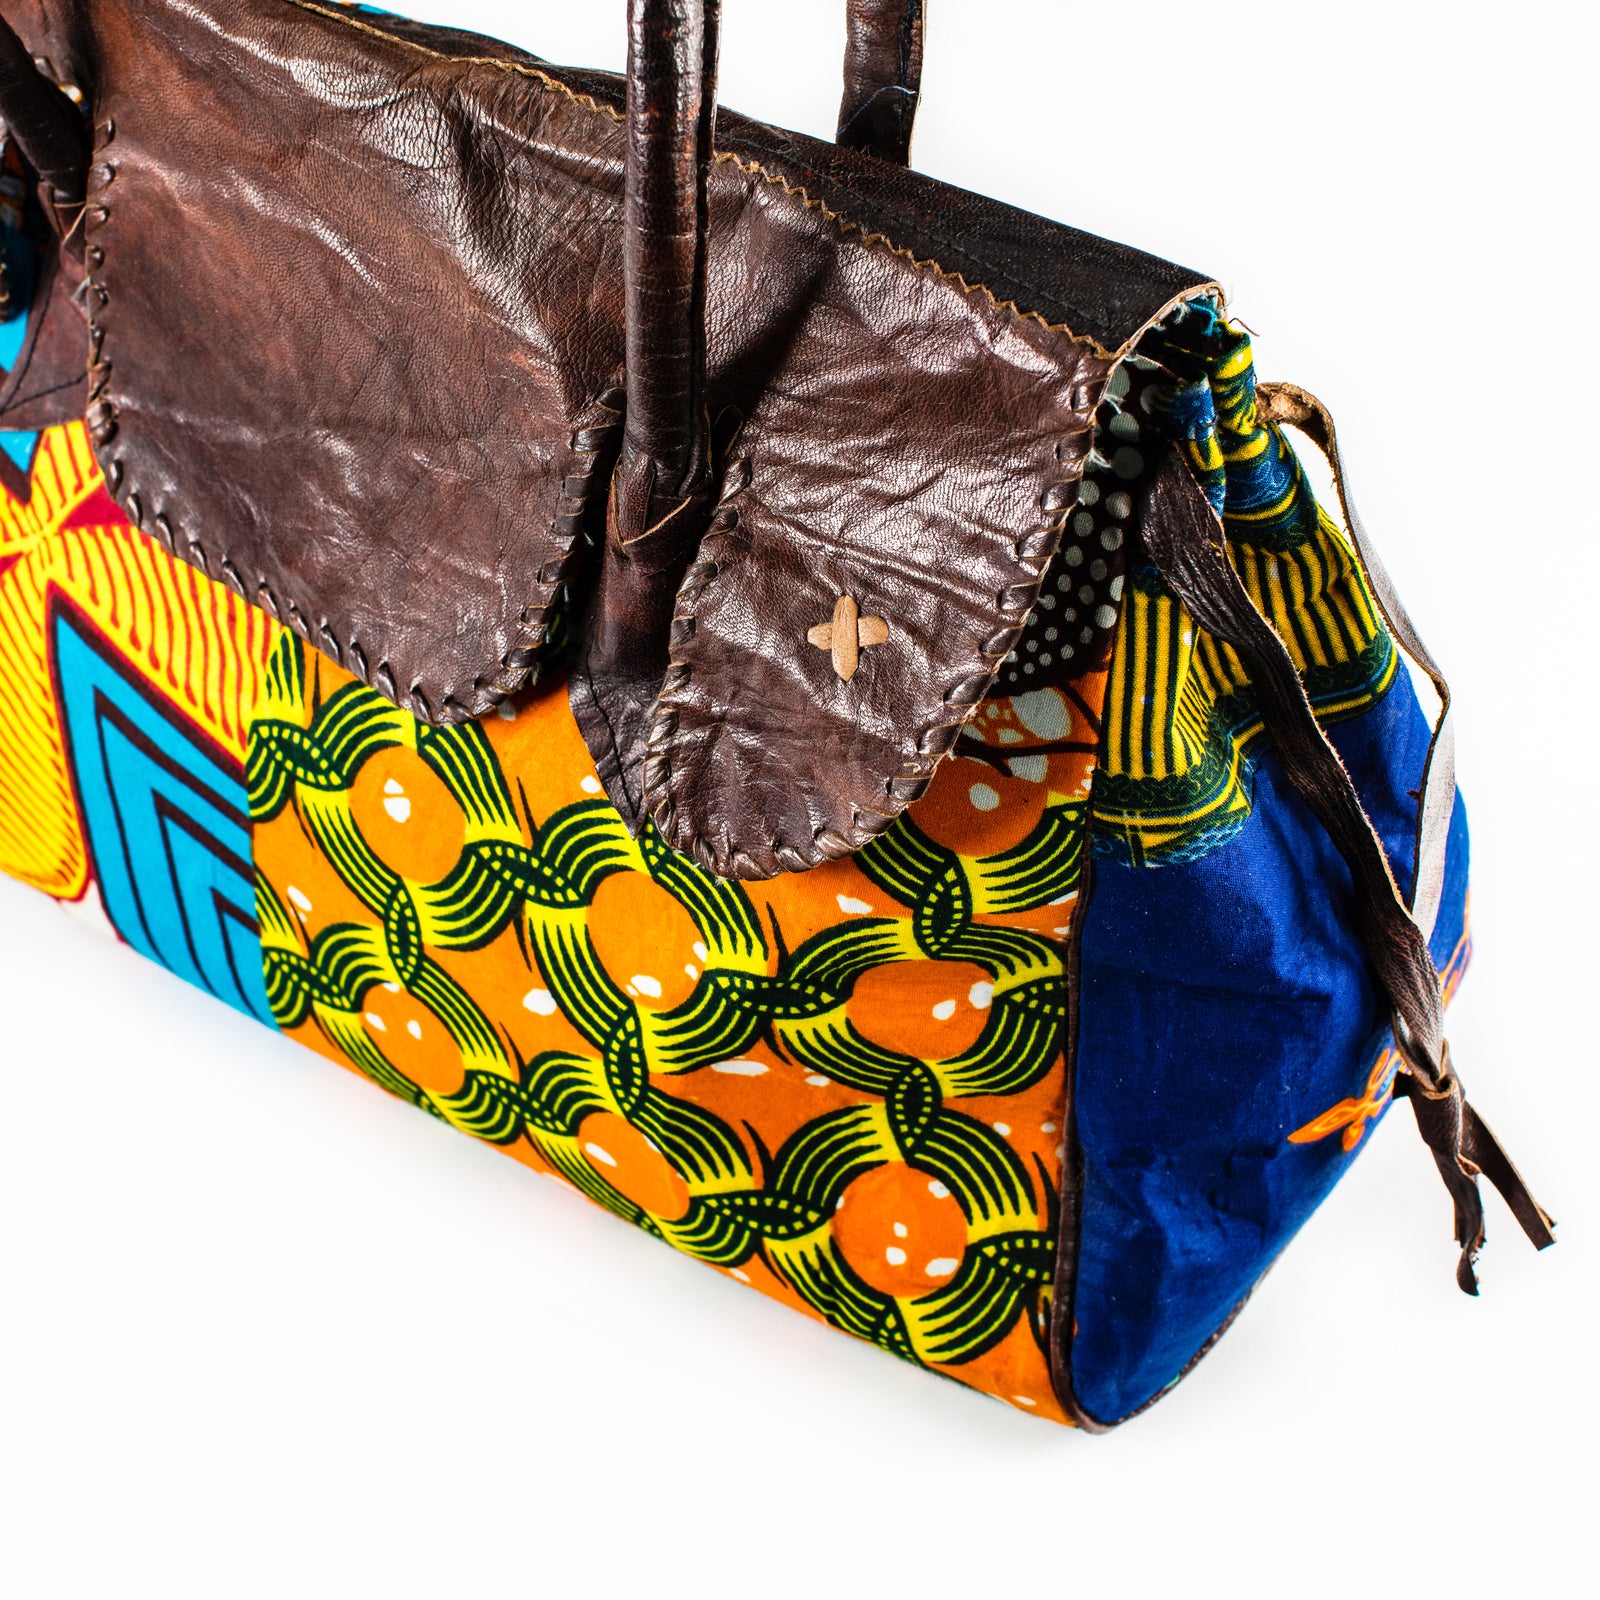 Vintage Bags Traditional Art Print Bag Leather Bags Handcrafted Art - Handbags Bags Accessories African Art